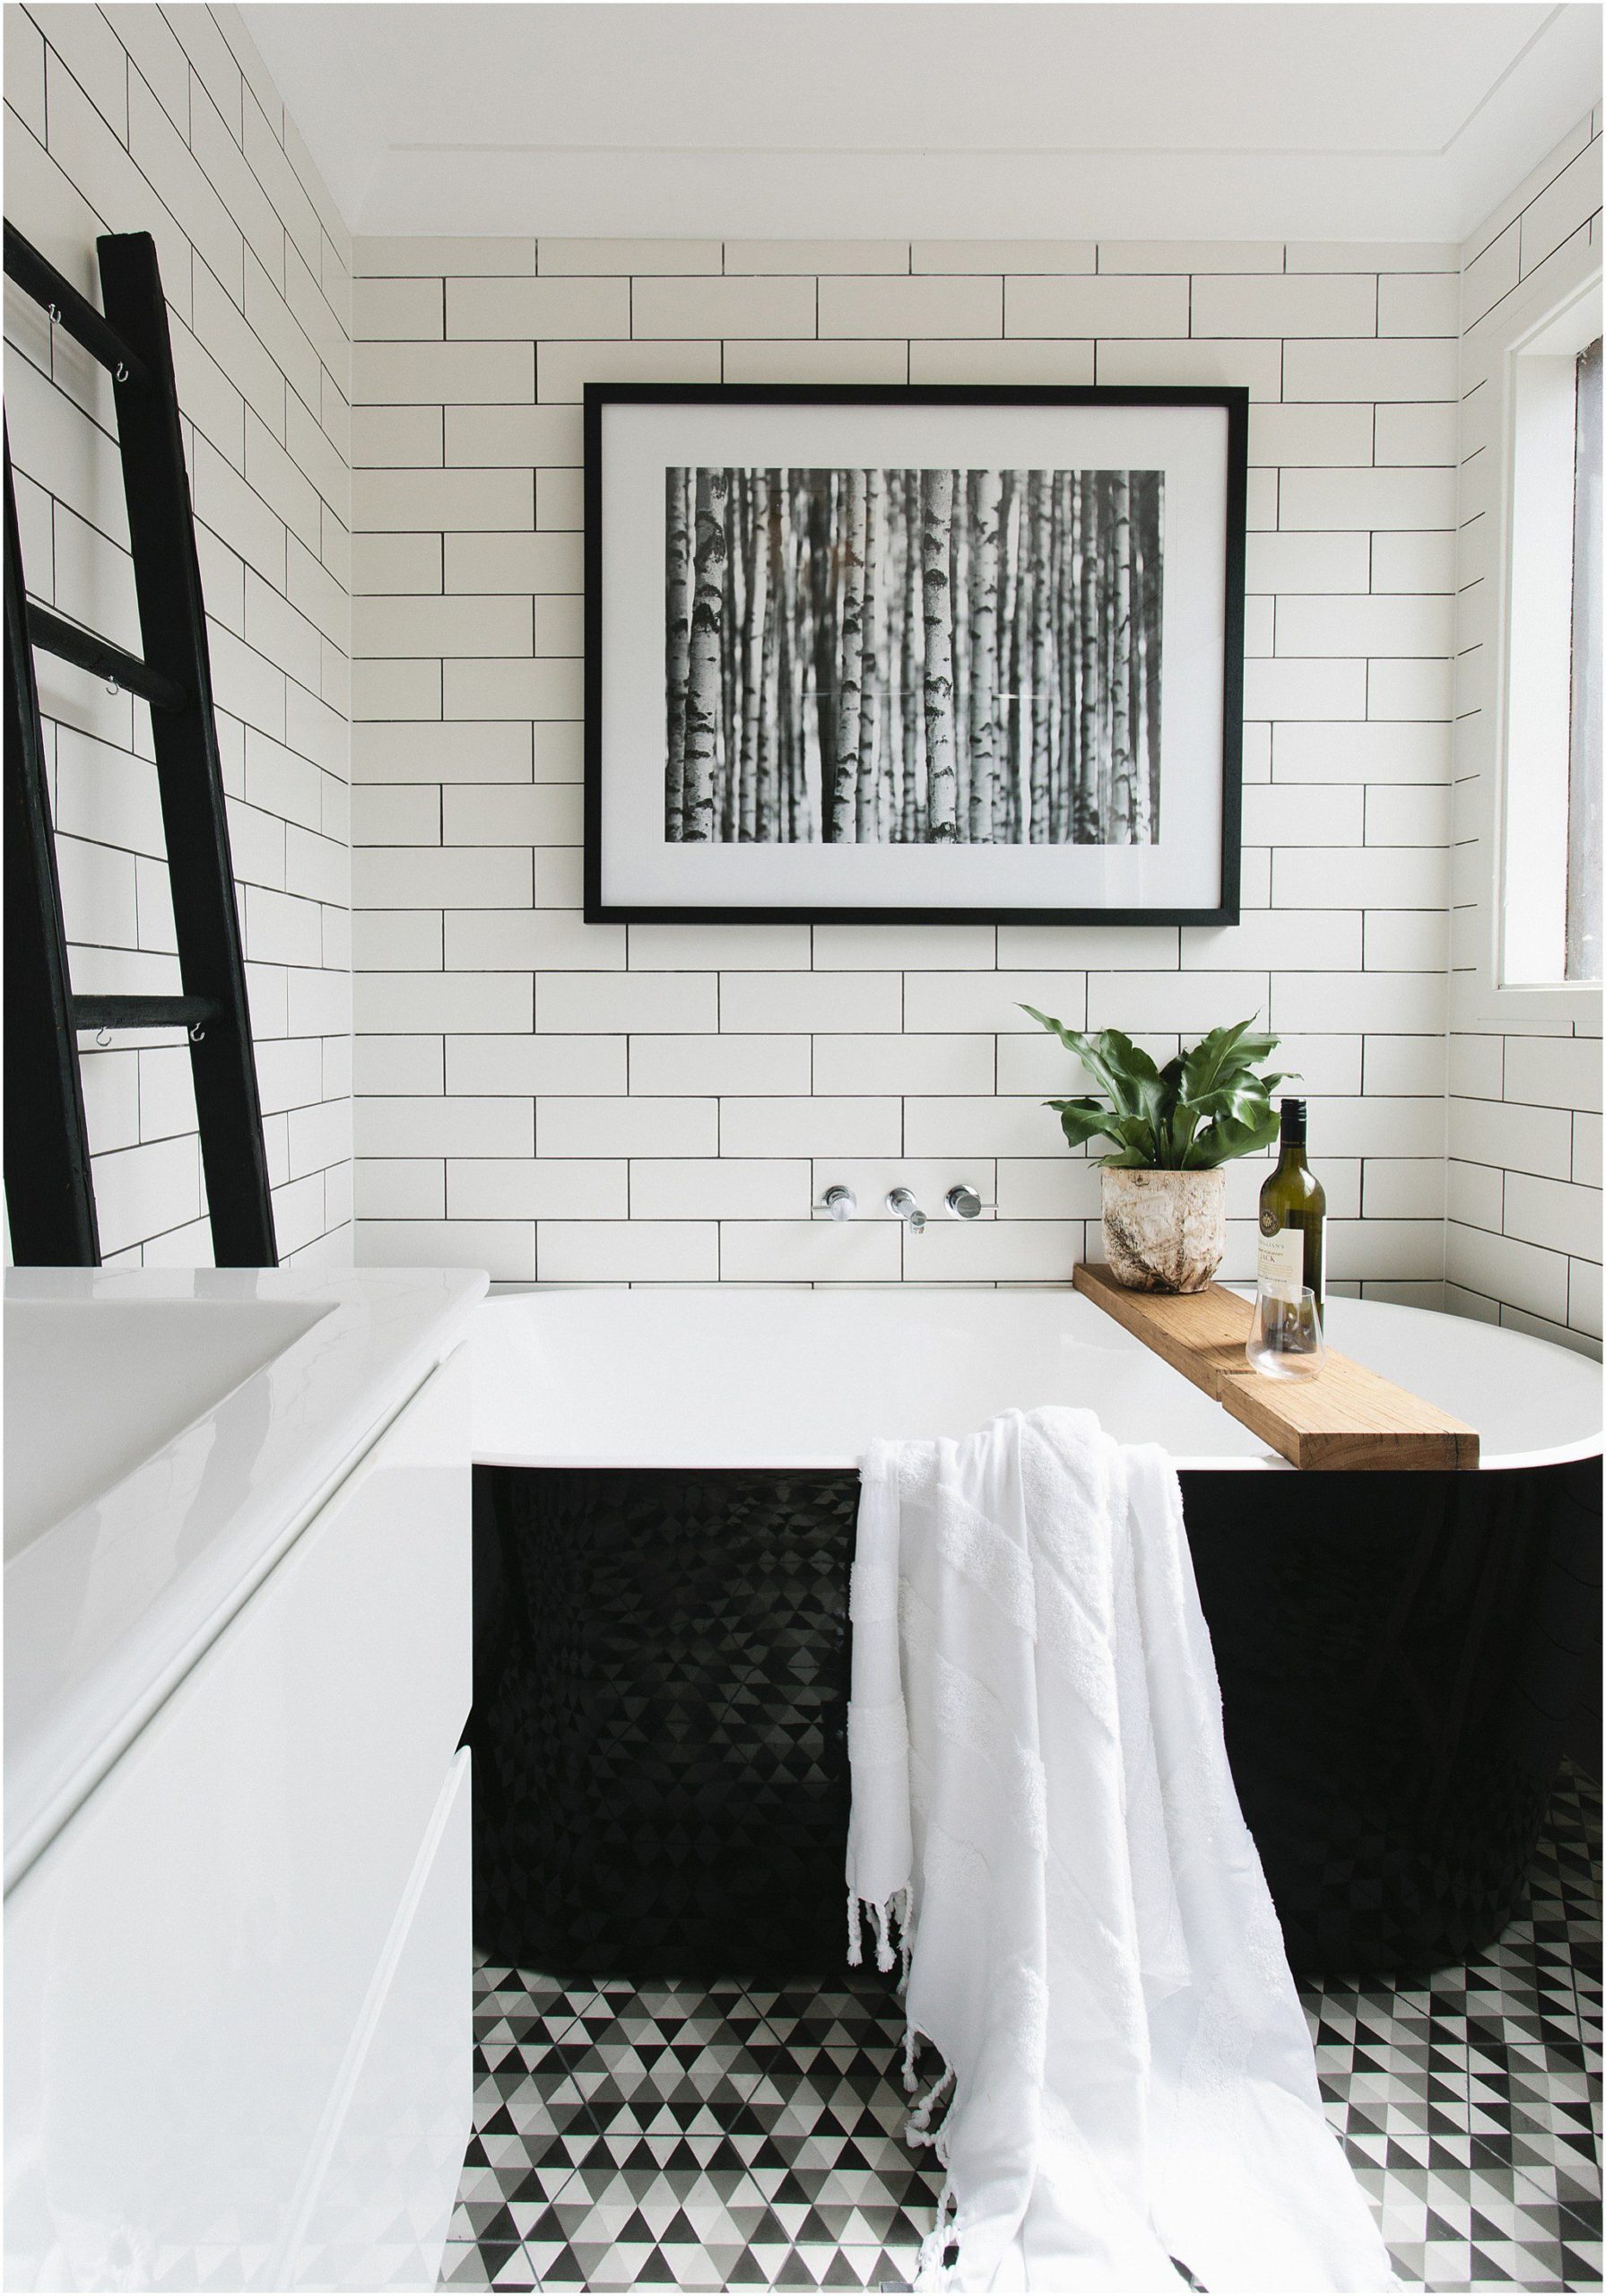 Bathroom styling, black and white, subway tiles